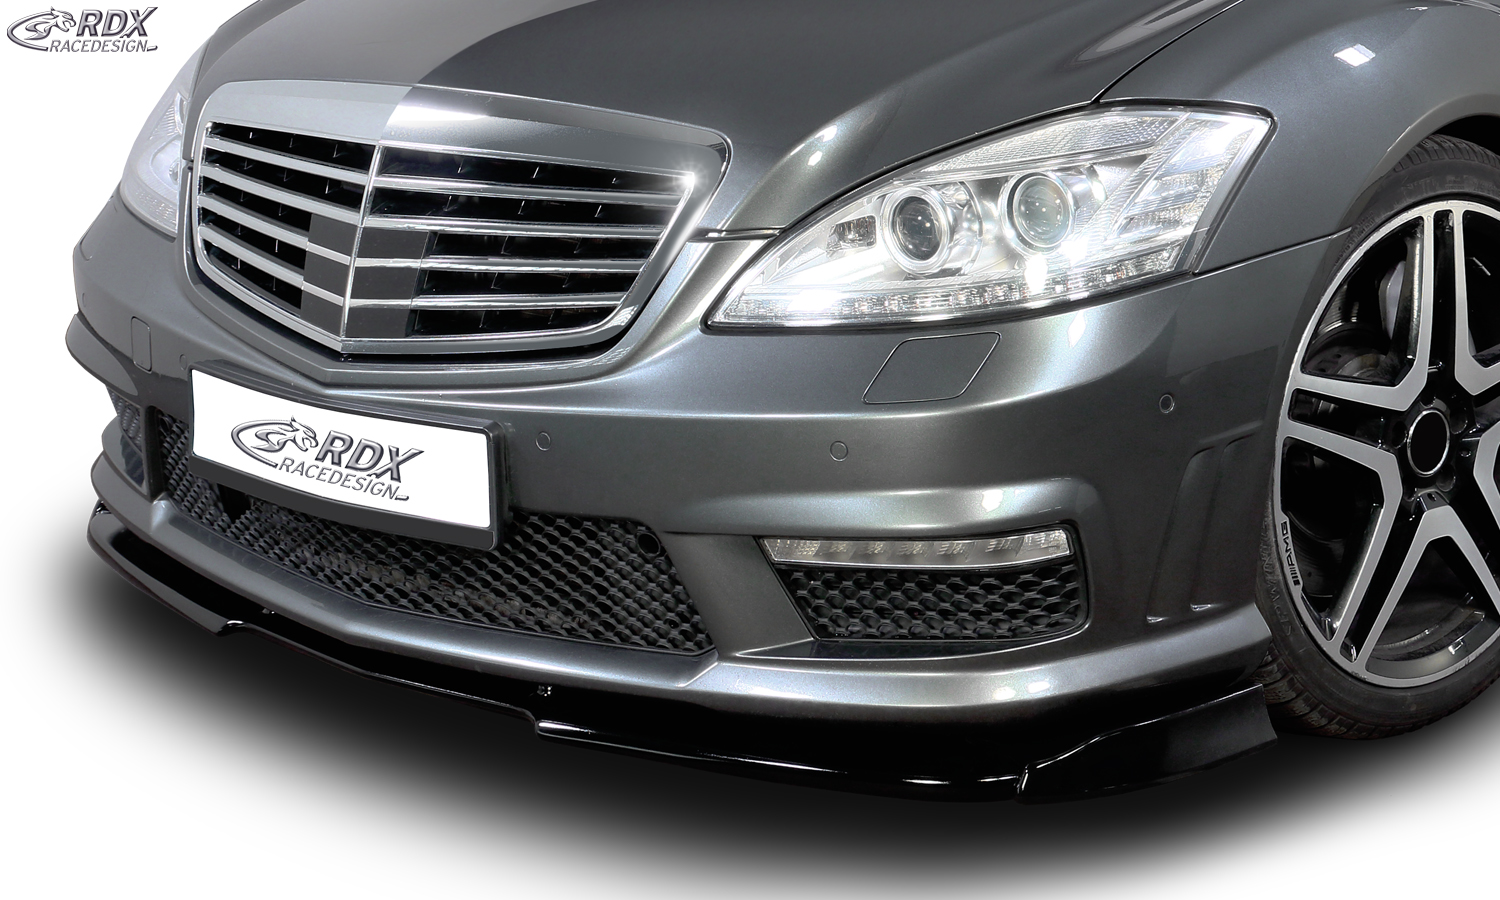 RDX Front Spoiler VARIO-X for MERCEDES S-class W221 AMG 2009+ (Fit for AMG and Cars with AMG Frontbumper) Front Lip Splitter